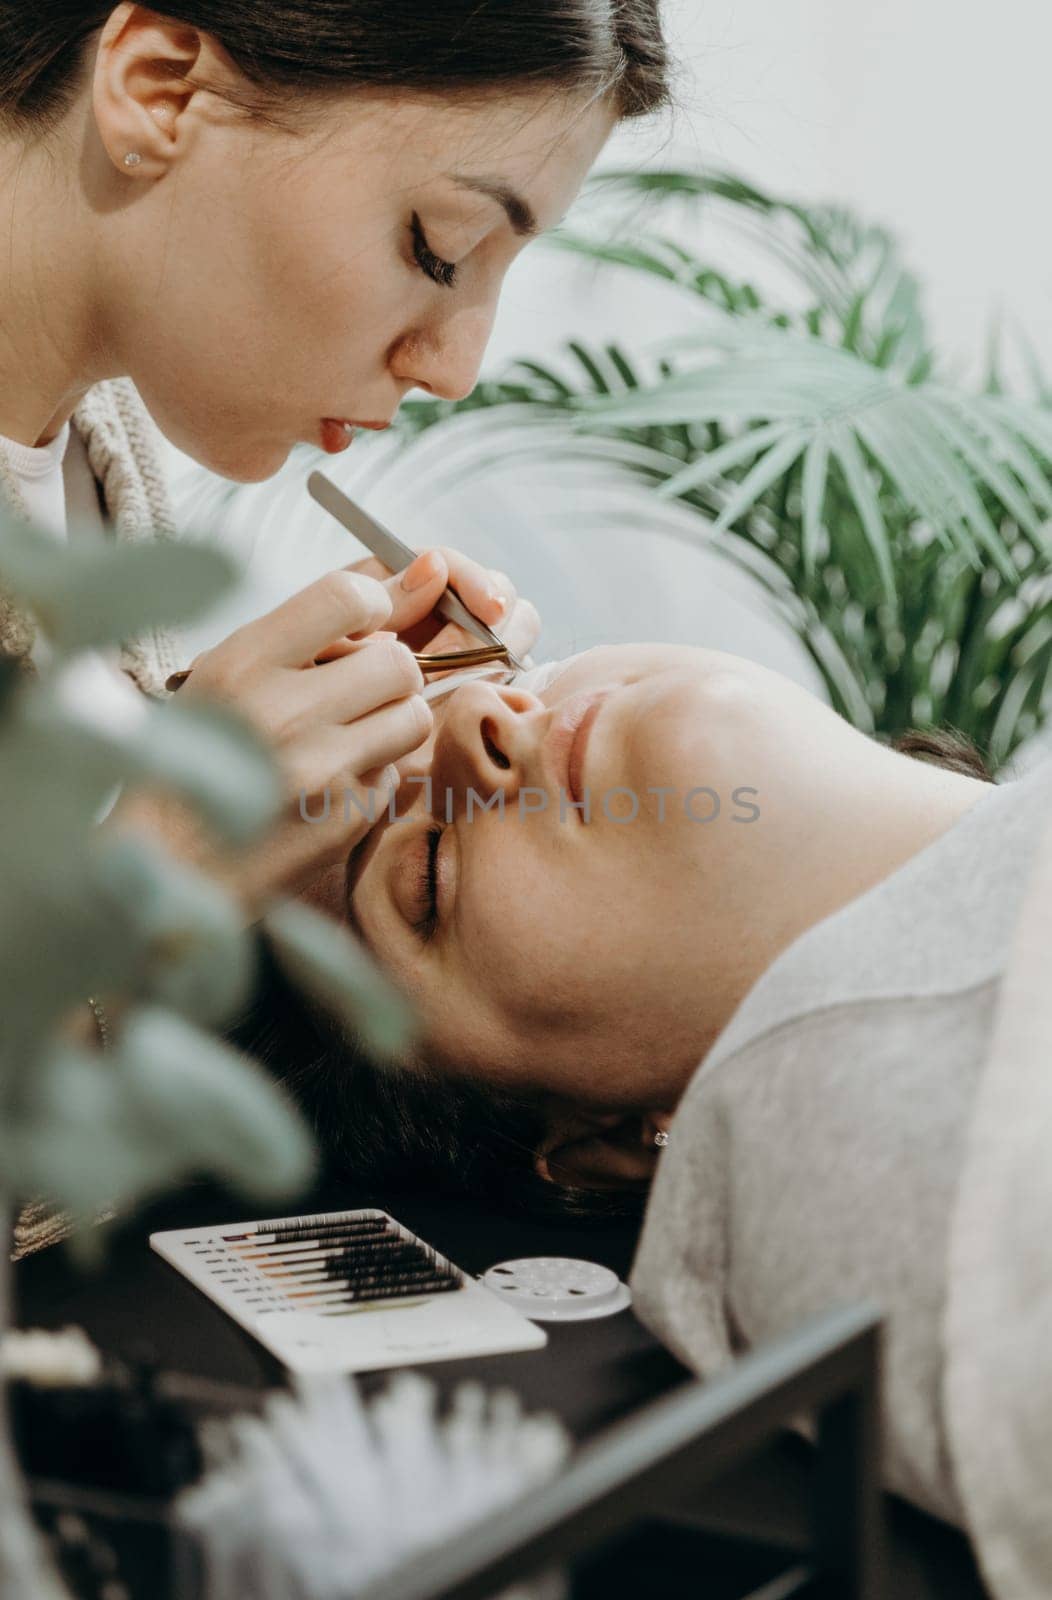 Portrait of one young beautiful Caucasian brunette girl, a cosmetologist glues artificial eyelashes with tweezers to the left of a female client lying on a cosmetology table in the office on a spring day, side view close-up. Concept of eyelash extensions, beauty industry.